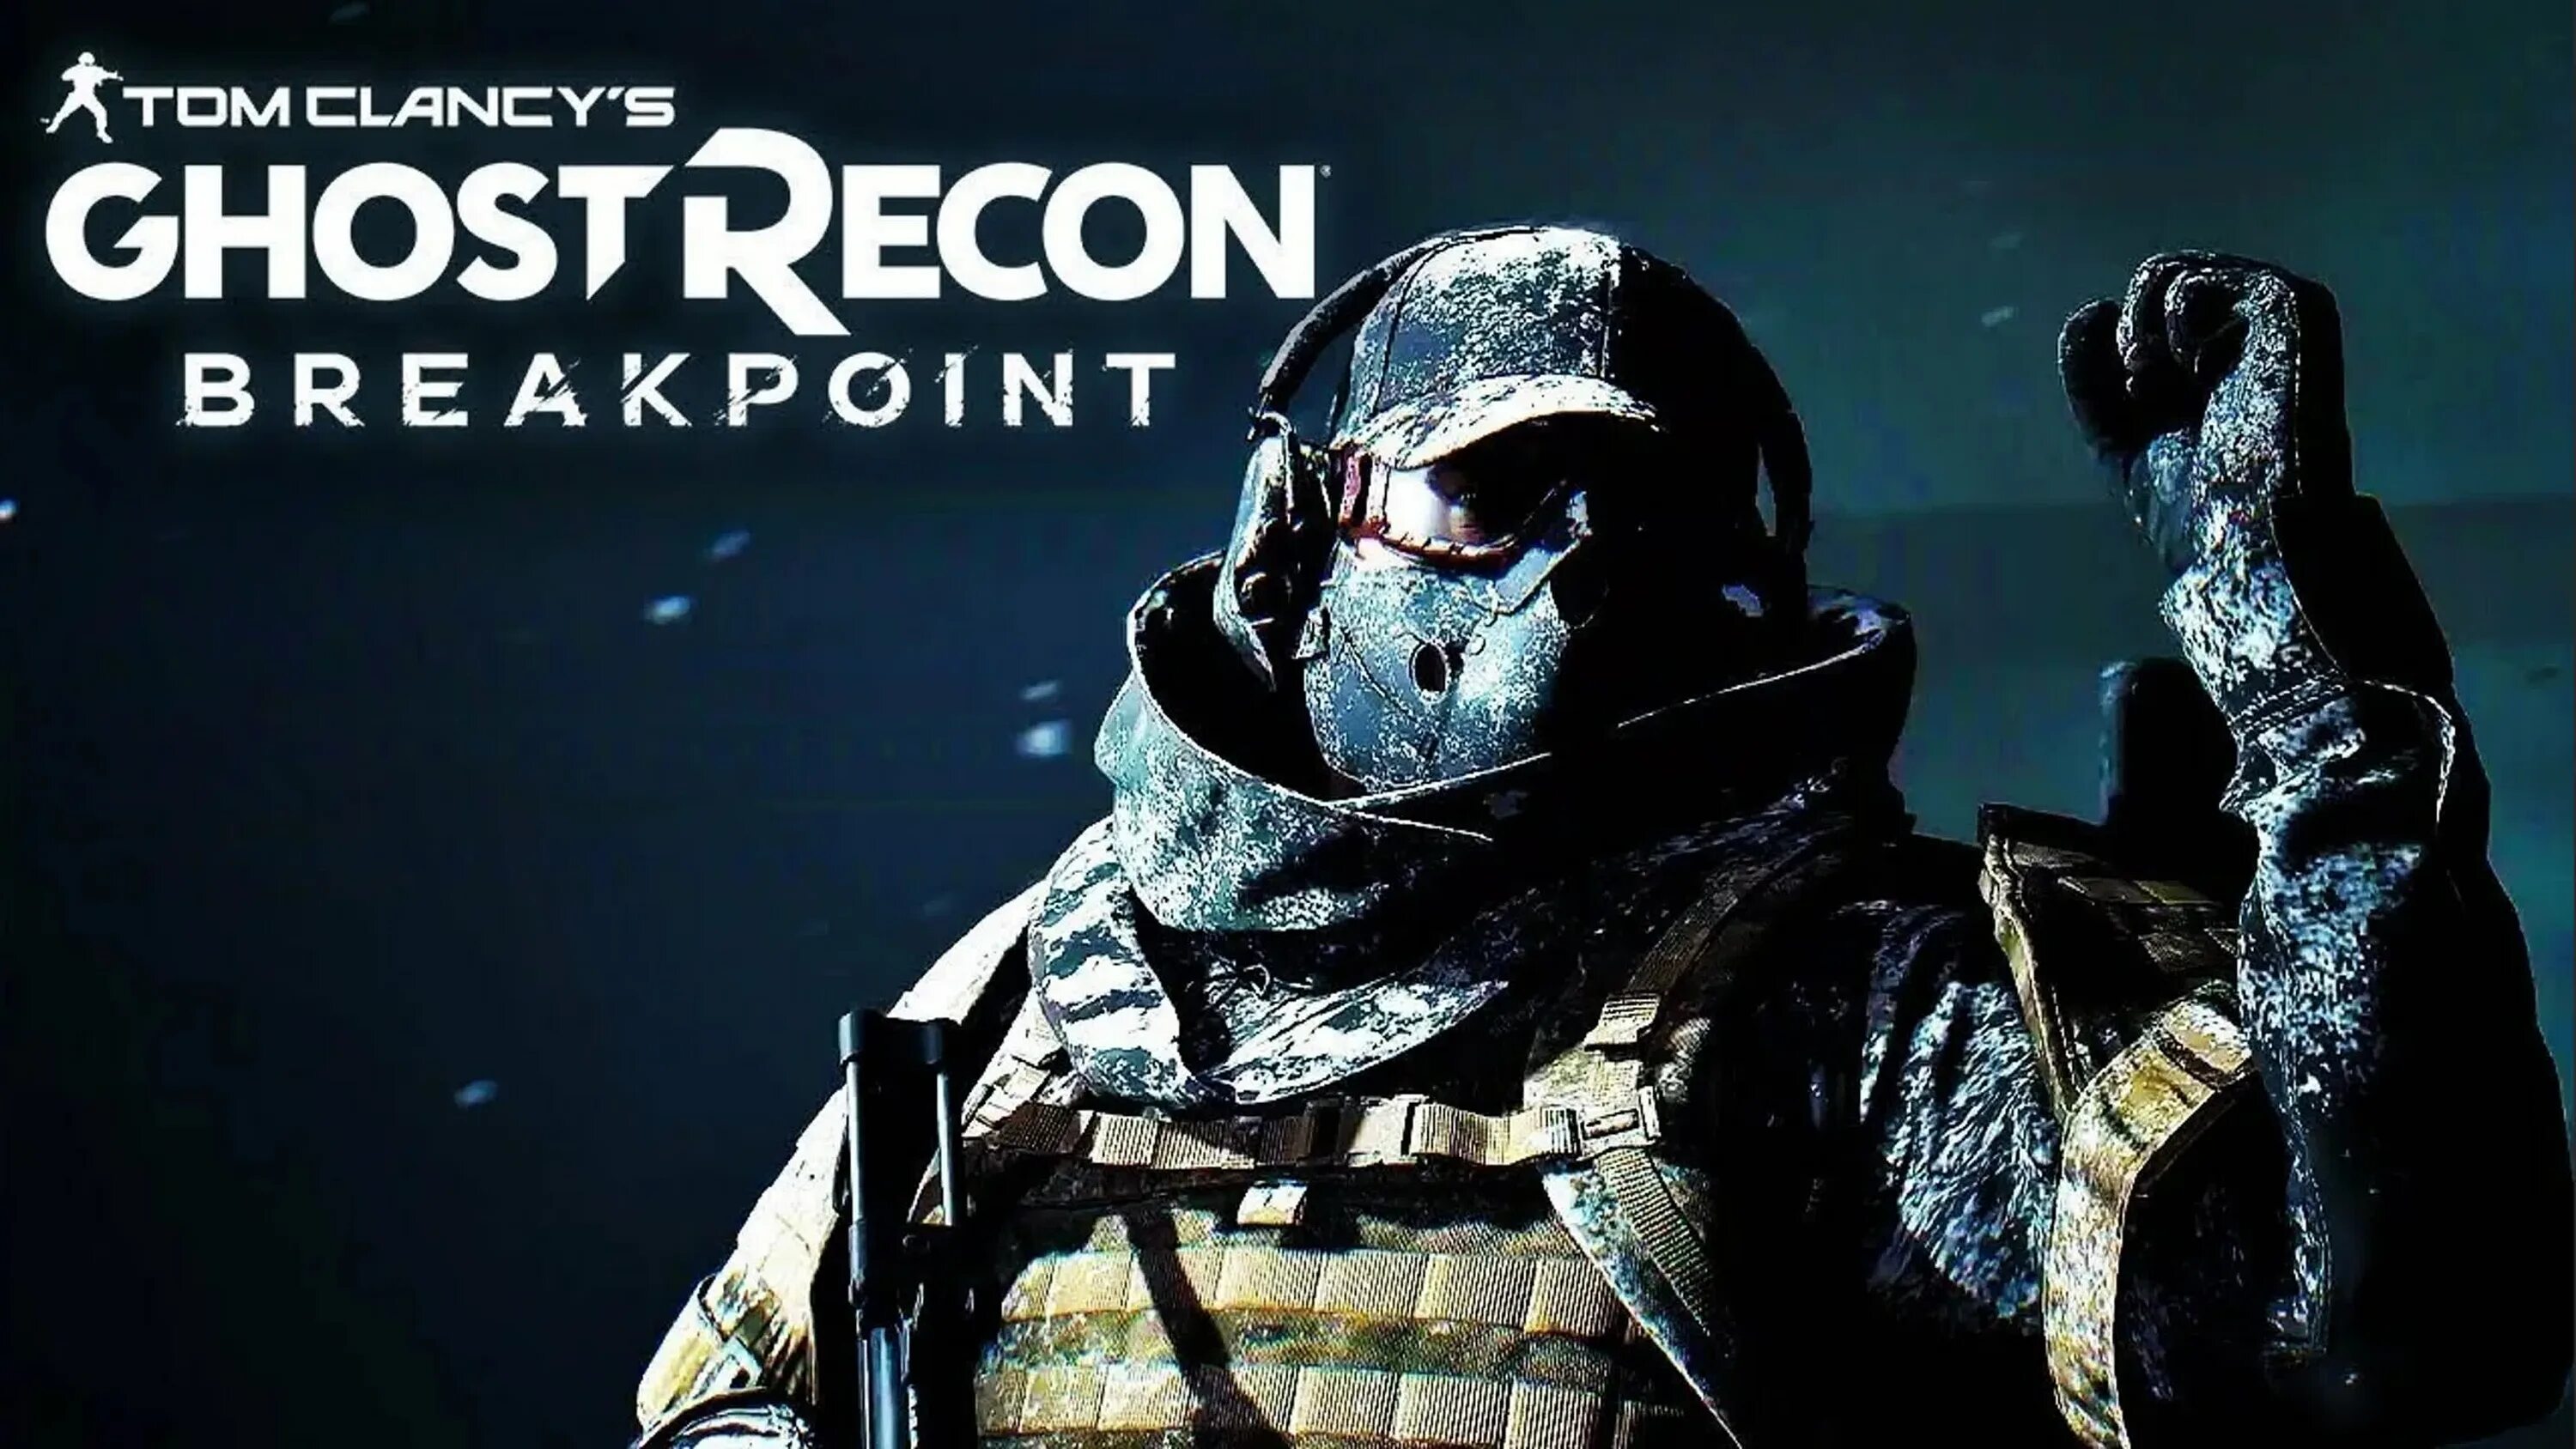 Overlord 3 1 ghost recon breakpoint. Tom Clancy's Ghost Recon. Tom Clancy s Ghost Recon breakpoint. Том Клэнси брейкпоинт. Игра том Клэнси брейкпоинт.